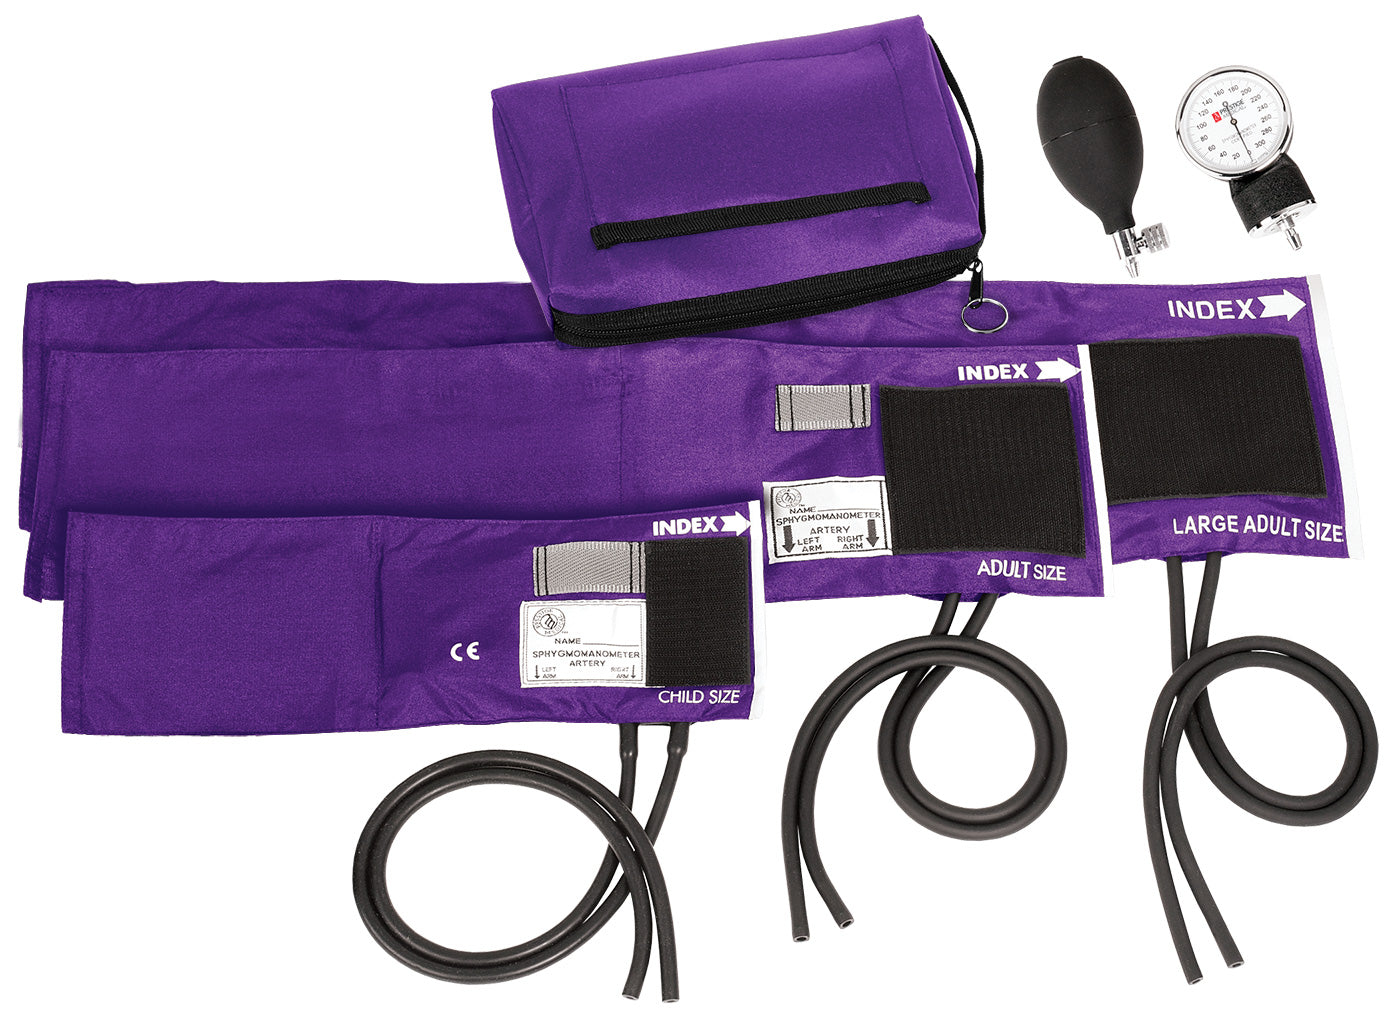 3-in-1 Aneroid Sphygmomanometer Set with Carry Case Purple